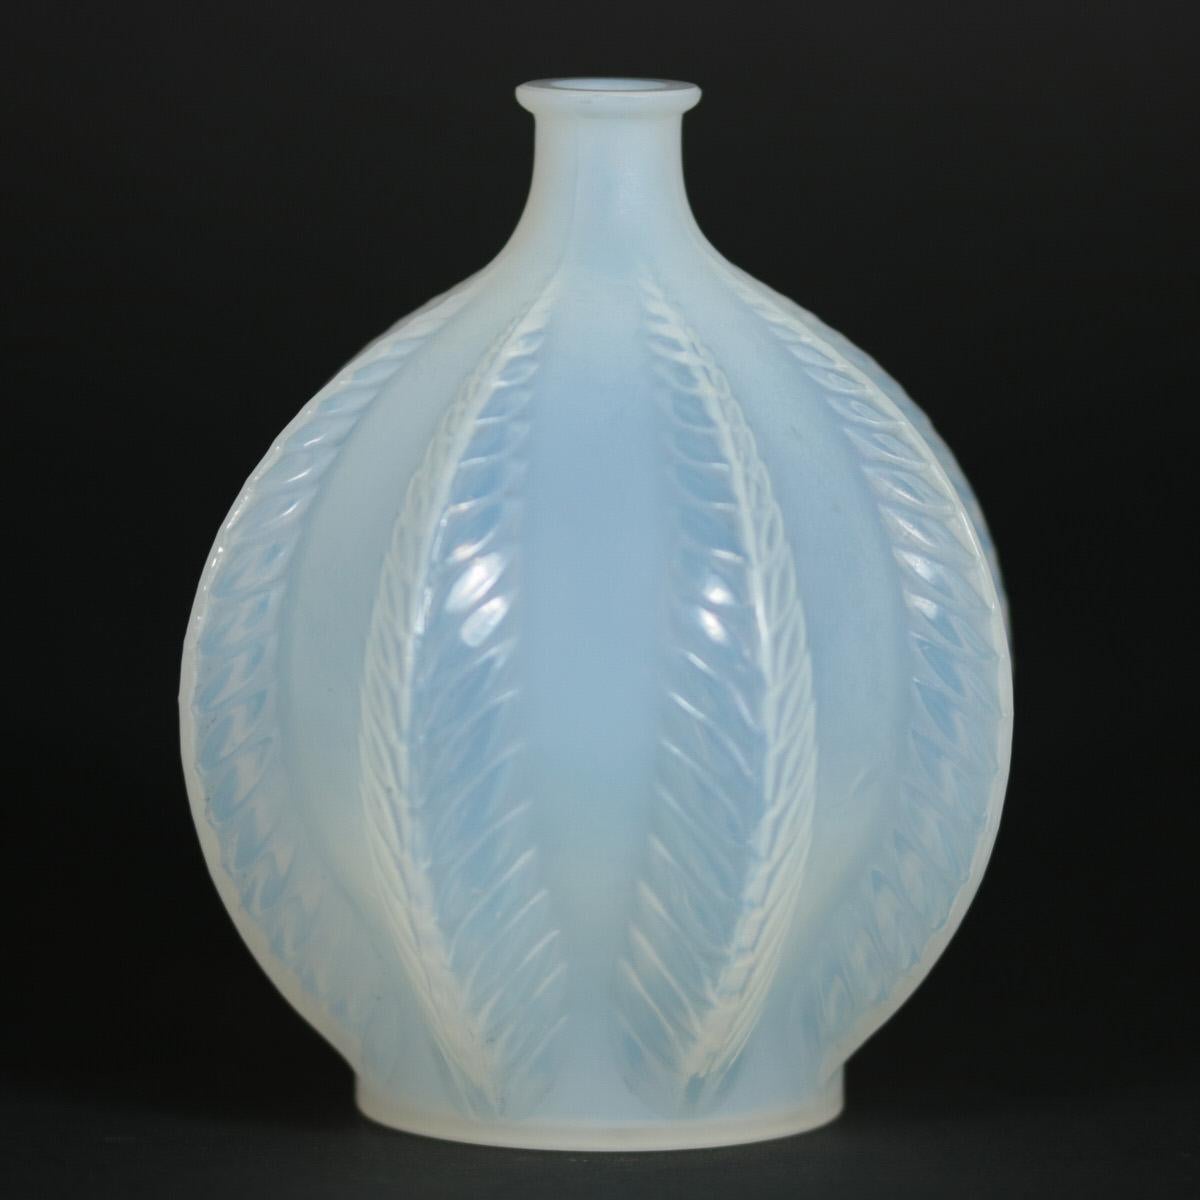 Rene Lalique opalescent glass 'Malines' vase. Pattern features fern fronds, climbing up the sides. Stencilled makers mark, 'R LALIQUE FRANCE' to the underside. Book reference: Marcilhac 957.